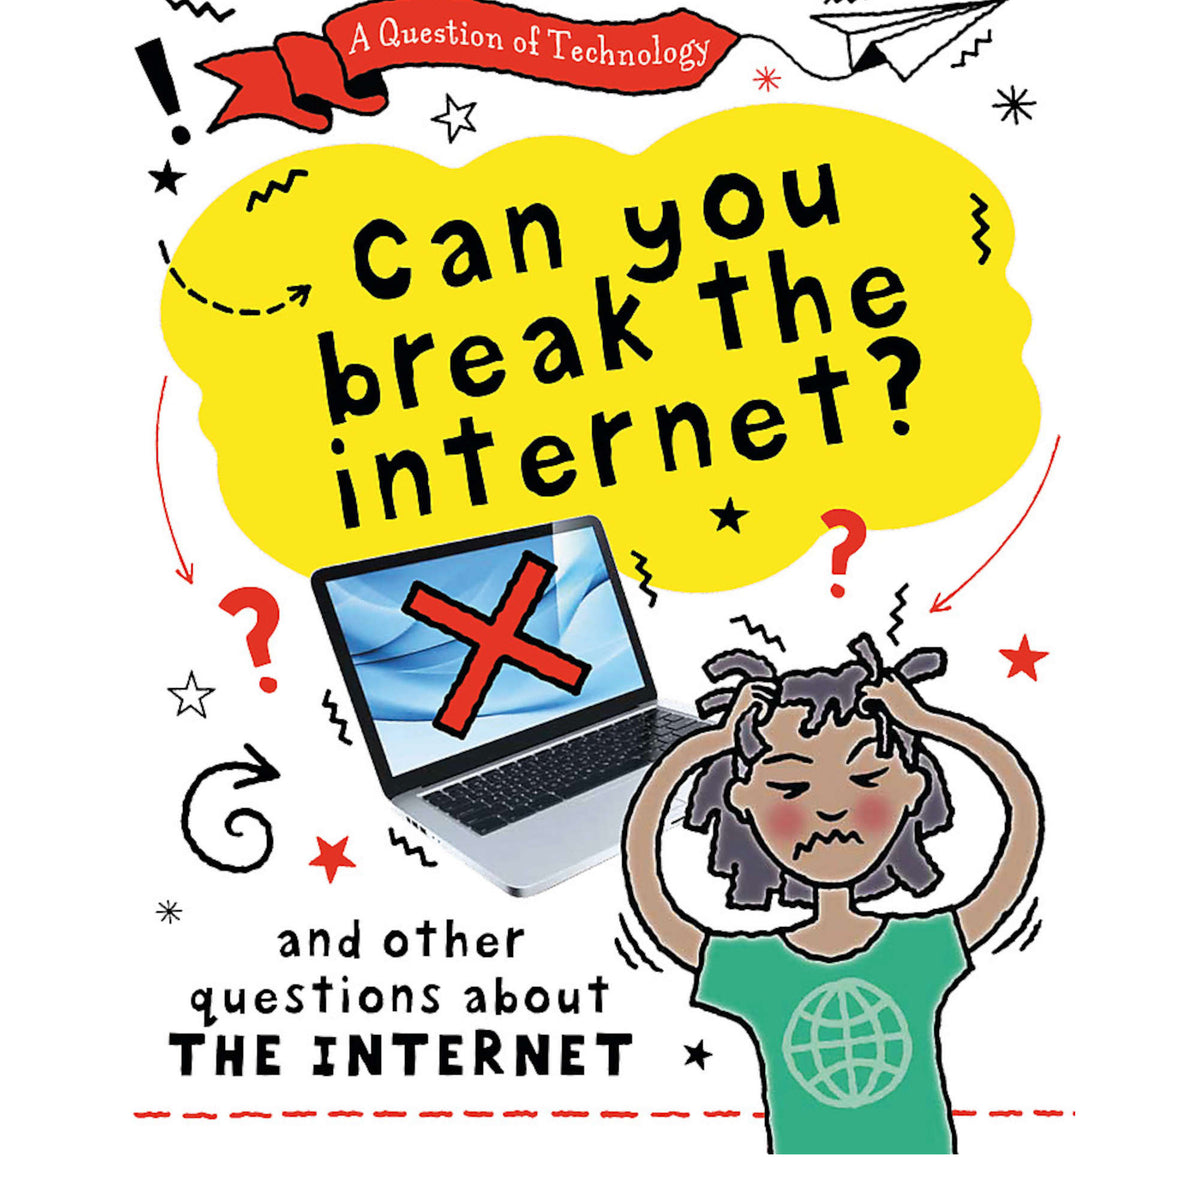 A Question of Technology: Can You Break the Internet?